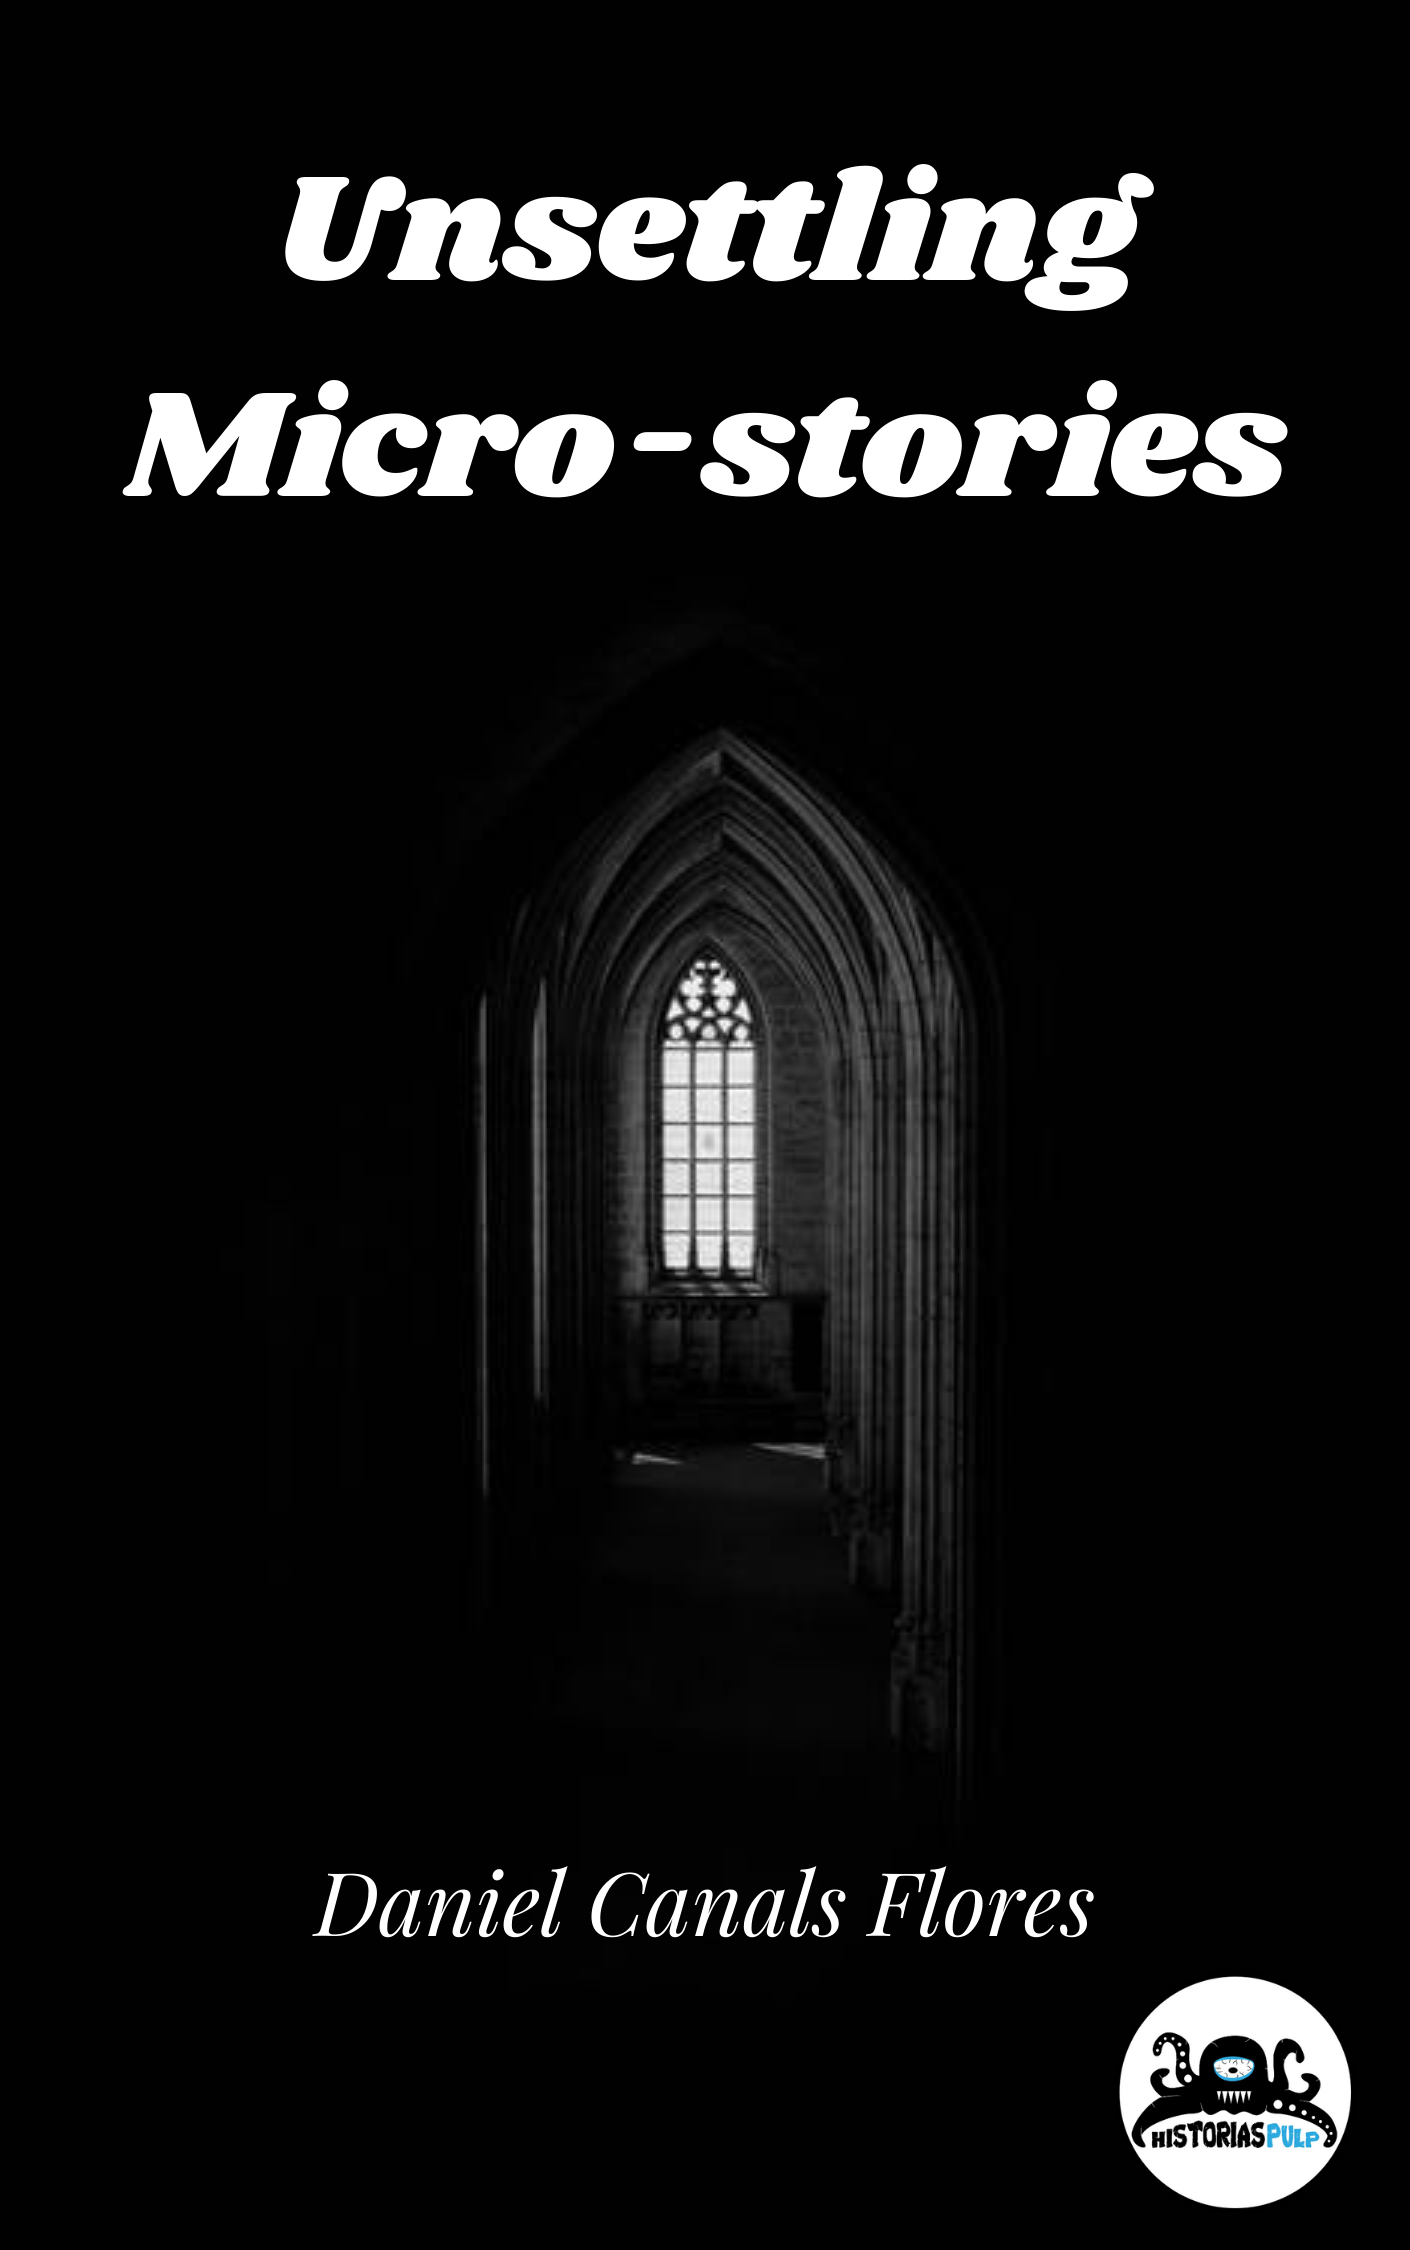 Unsettling Micro-stories, by Daniel Canals Flores